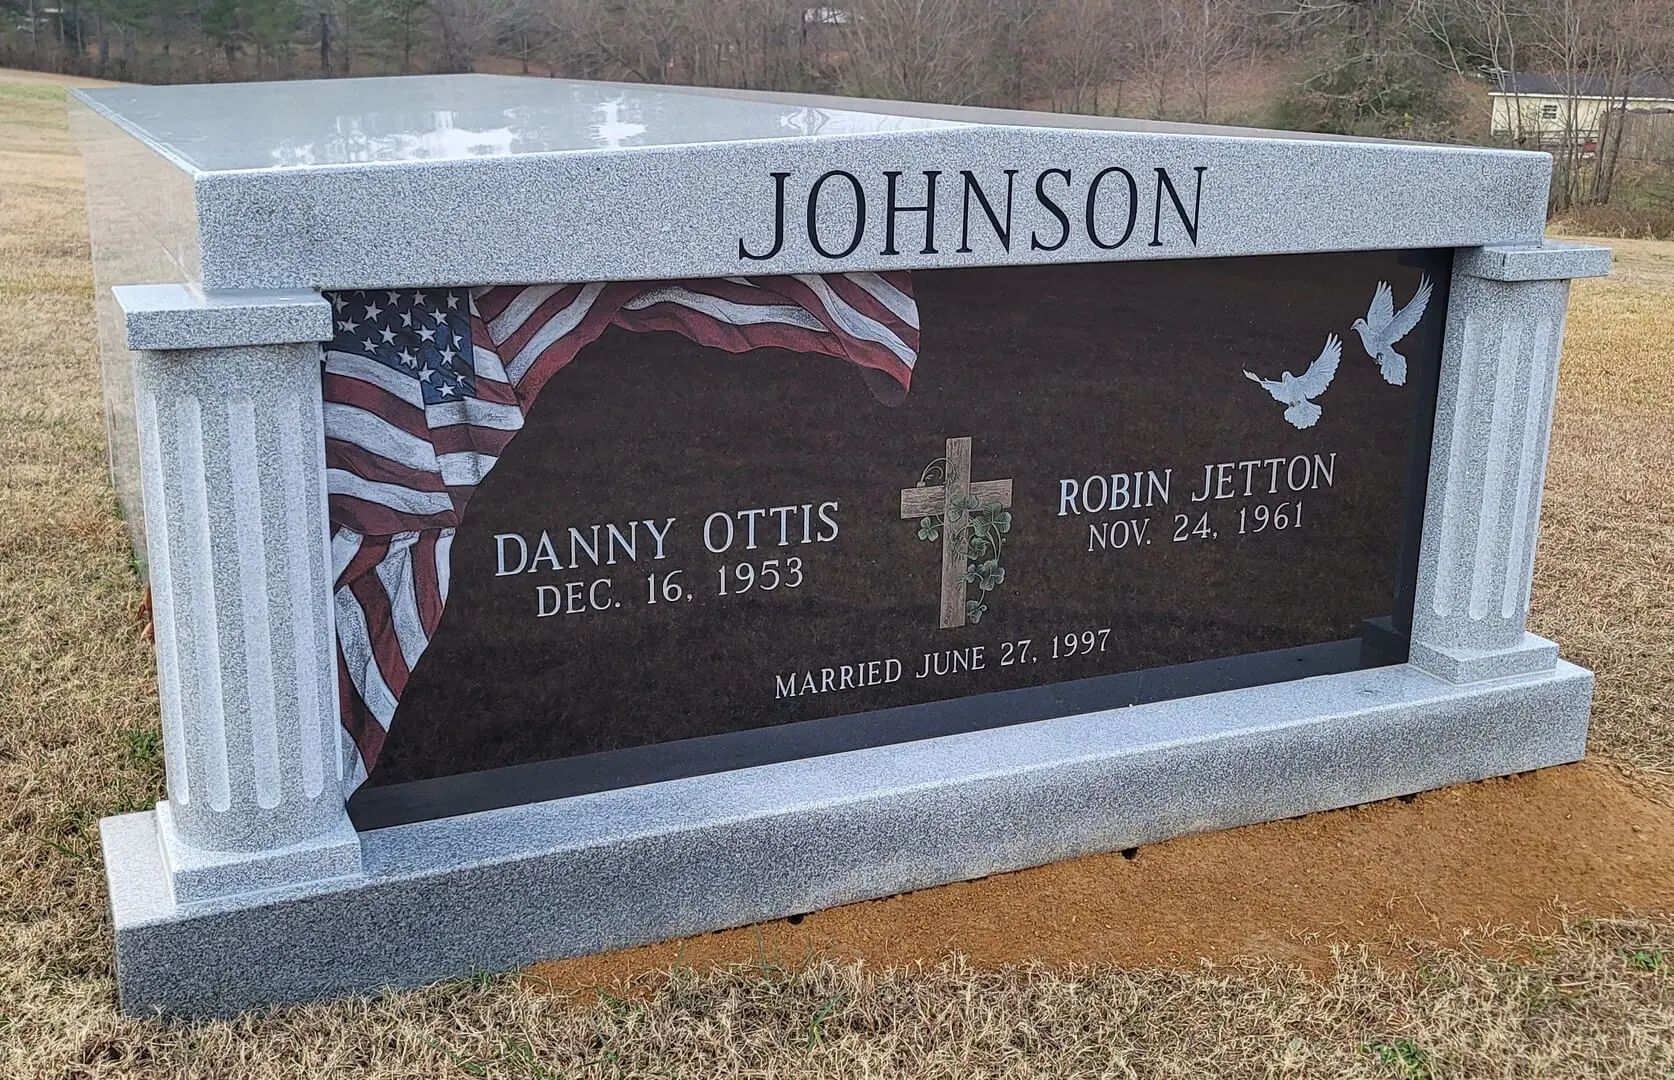 A memorial slab with the name Danny Ottis and Robin Jetton